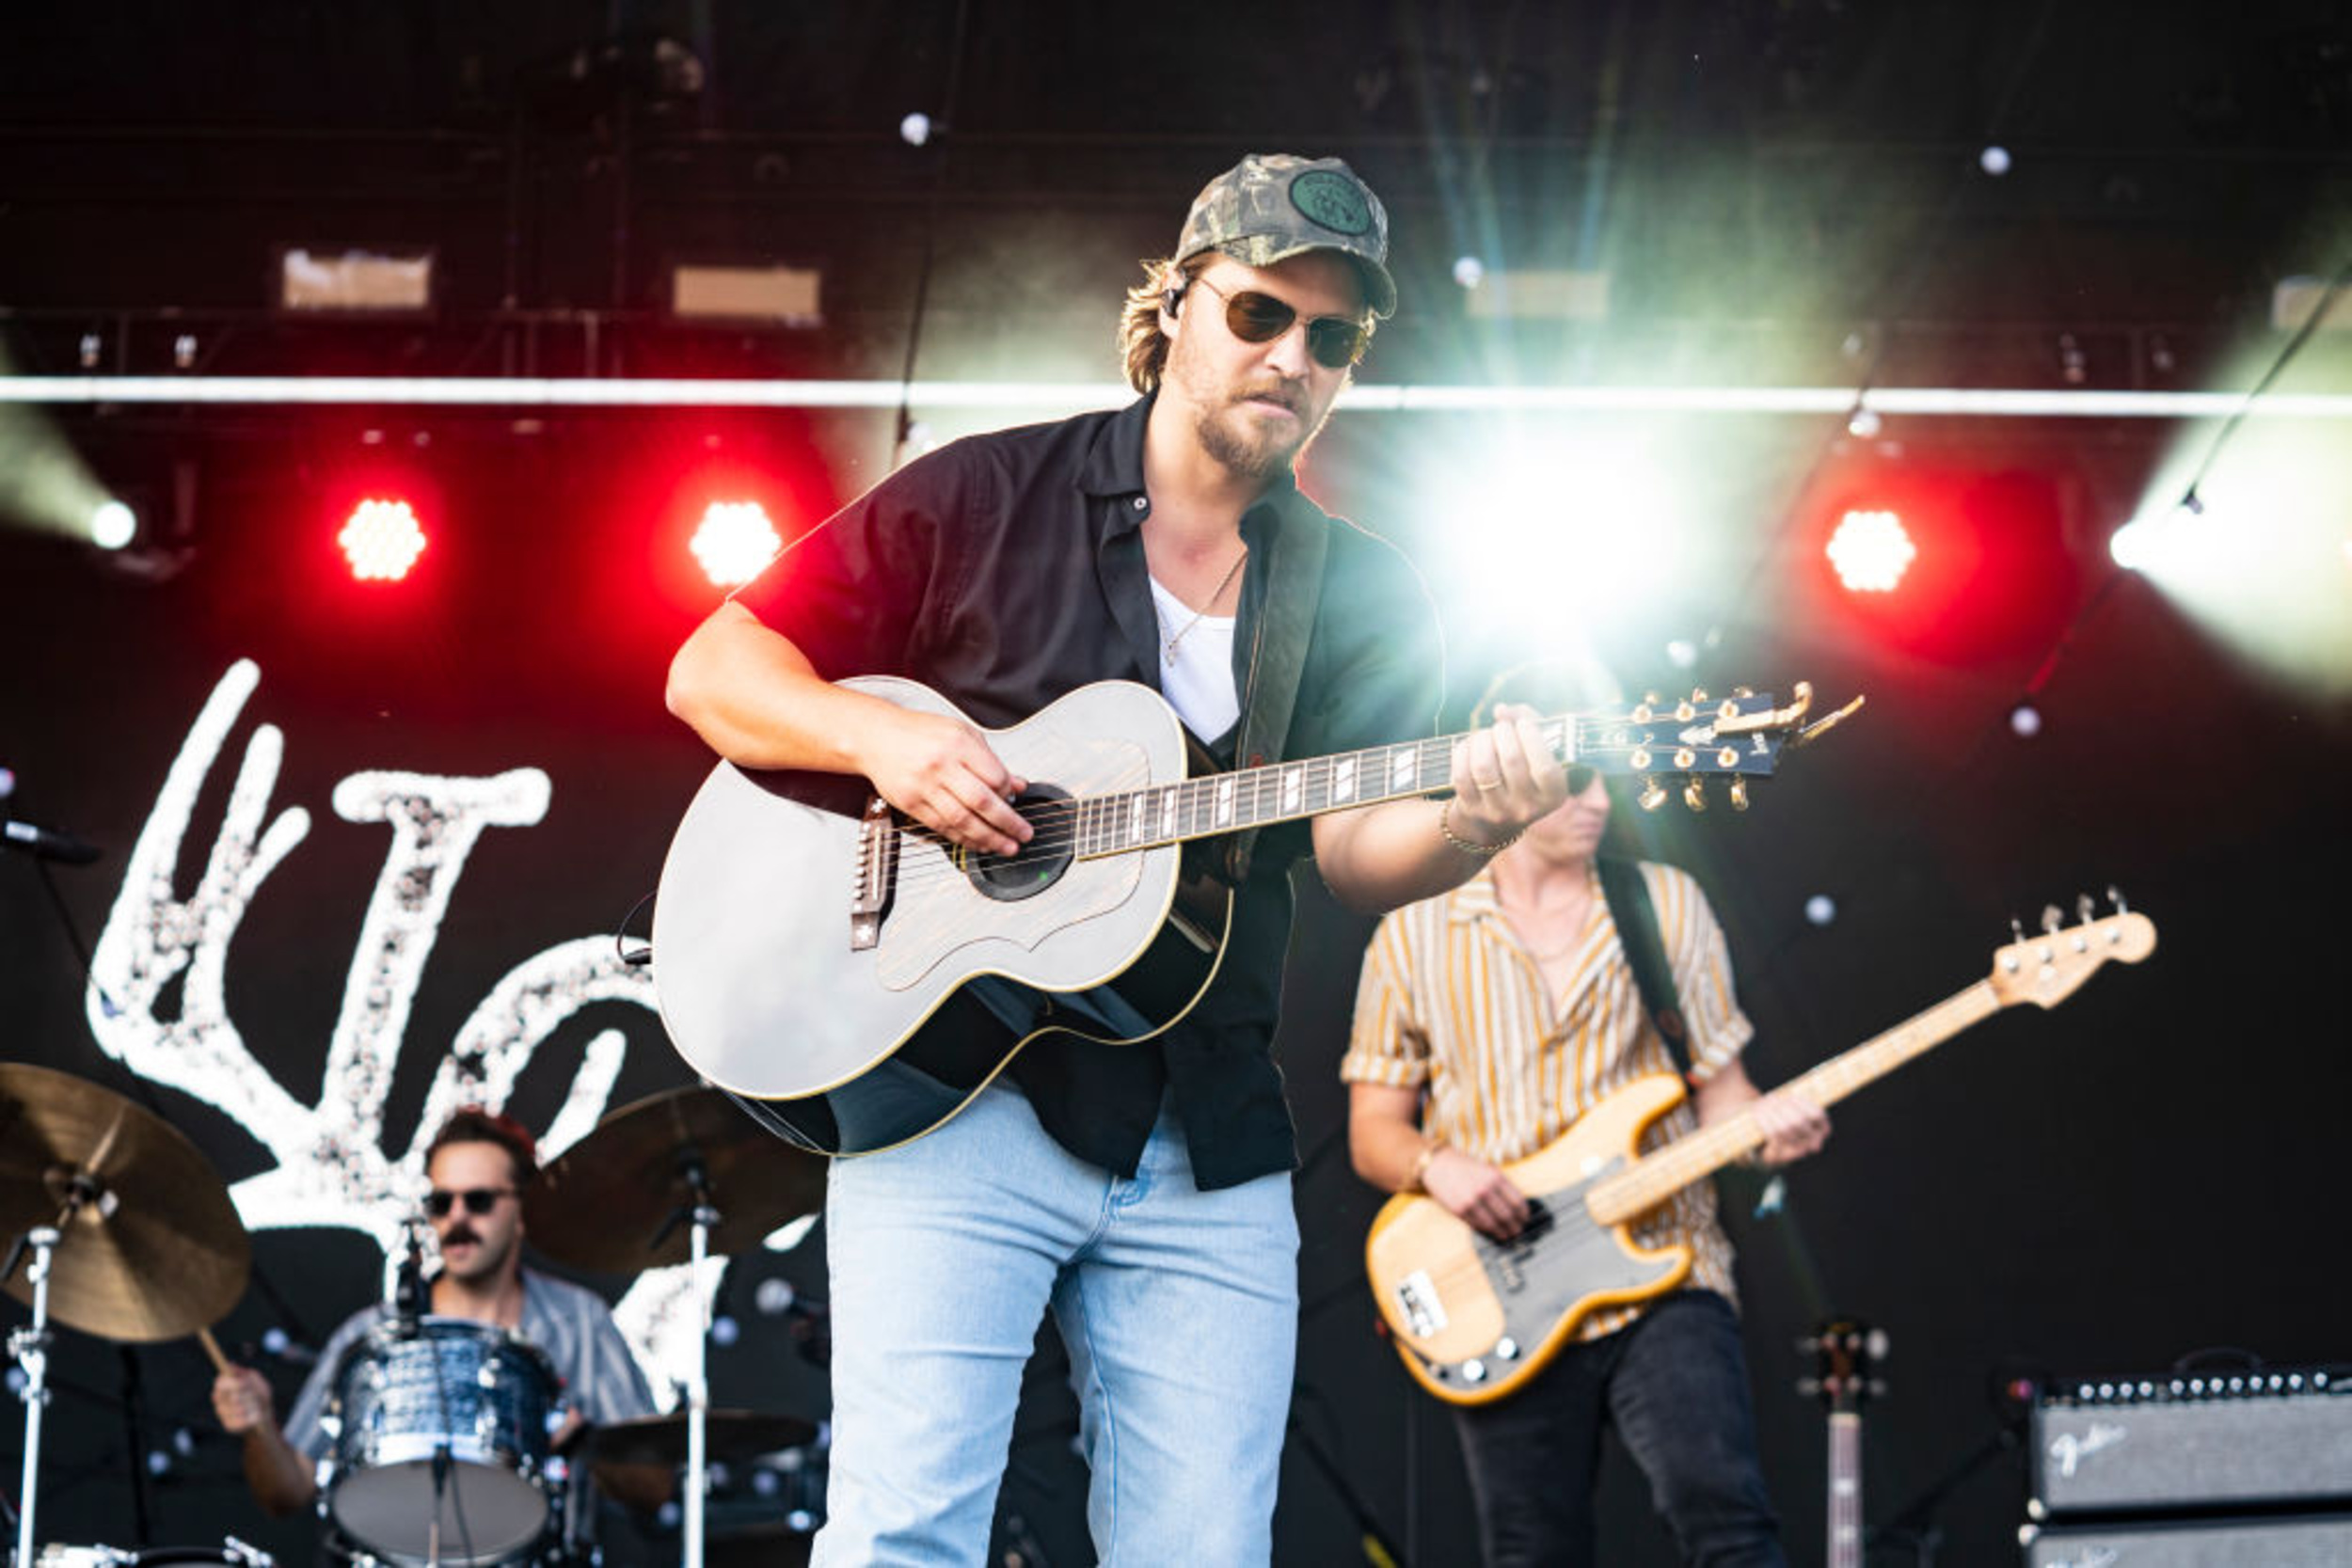 <p>Luke Grimes is no stranger to stardom thanks to his role as Kayce Dutton on the wildly popular show "Yellowstone," but 2024 is also going to be a huge year for him musically. On March 8, Grimes will release his self-titled debut album, led by the single "God and a Girl." </p><p><a href='https://www.msn.com/en-us/community/channel/vid-cj9pqbr0vn9in2b6ddcd8sfgpfq6x6utp44fssrv6mc2gtybw0us'>Follow us on MSN to see more of our exclusive entertainment content.</a></p>